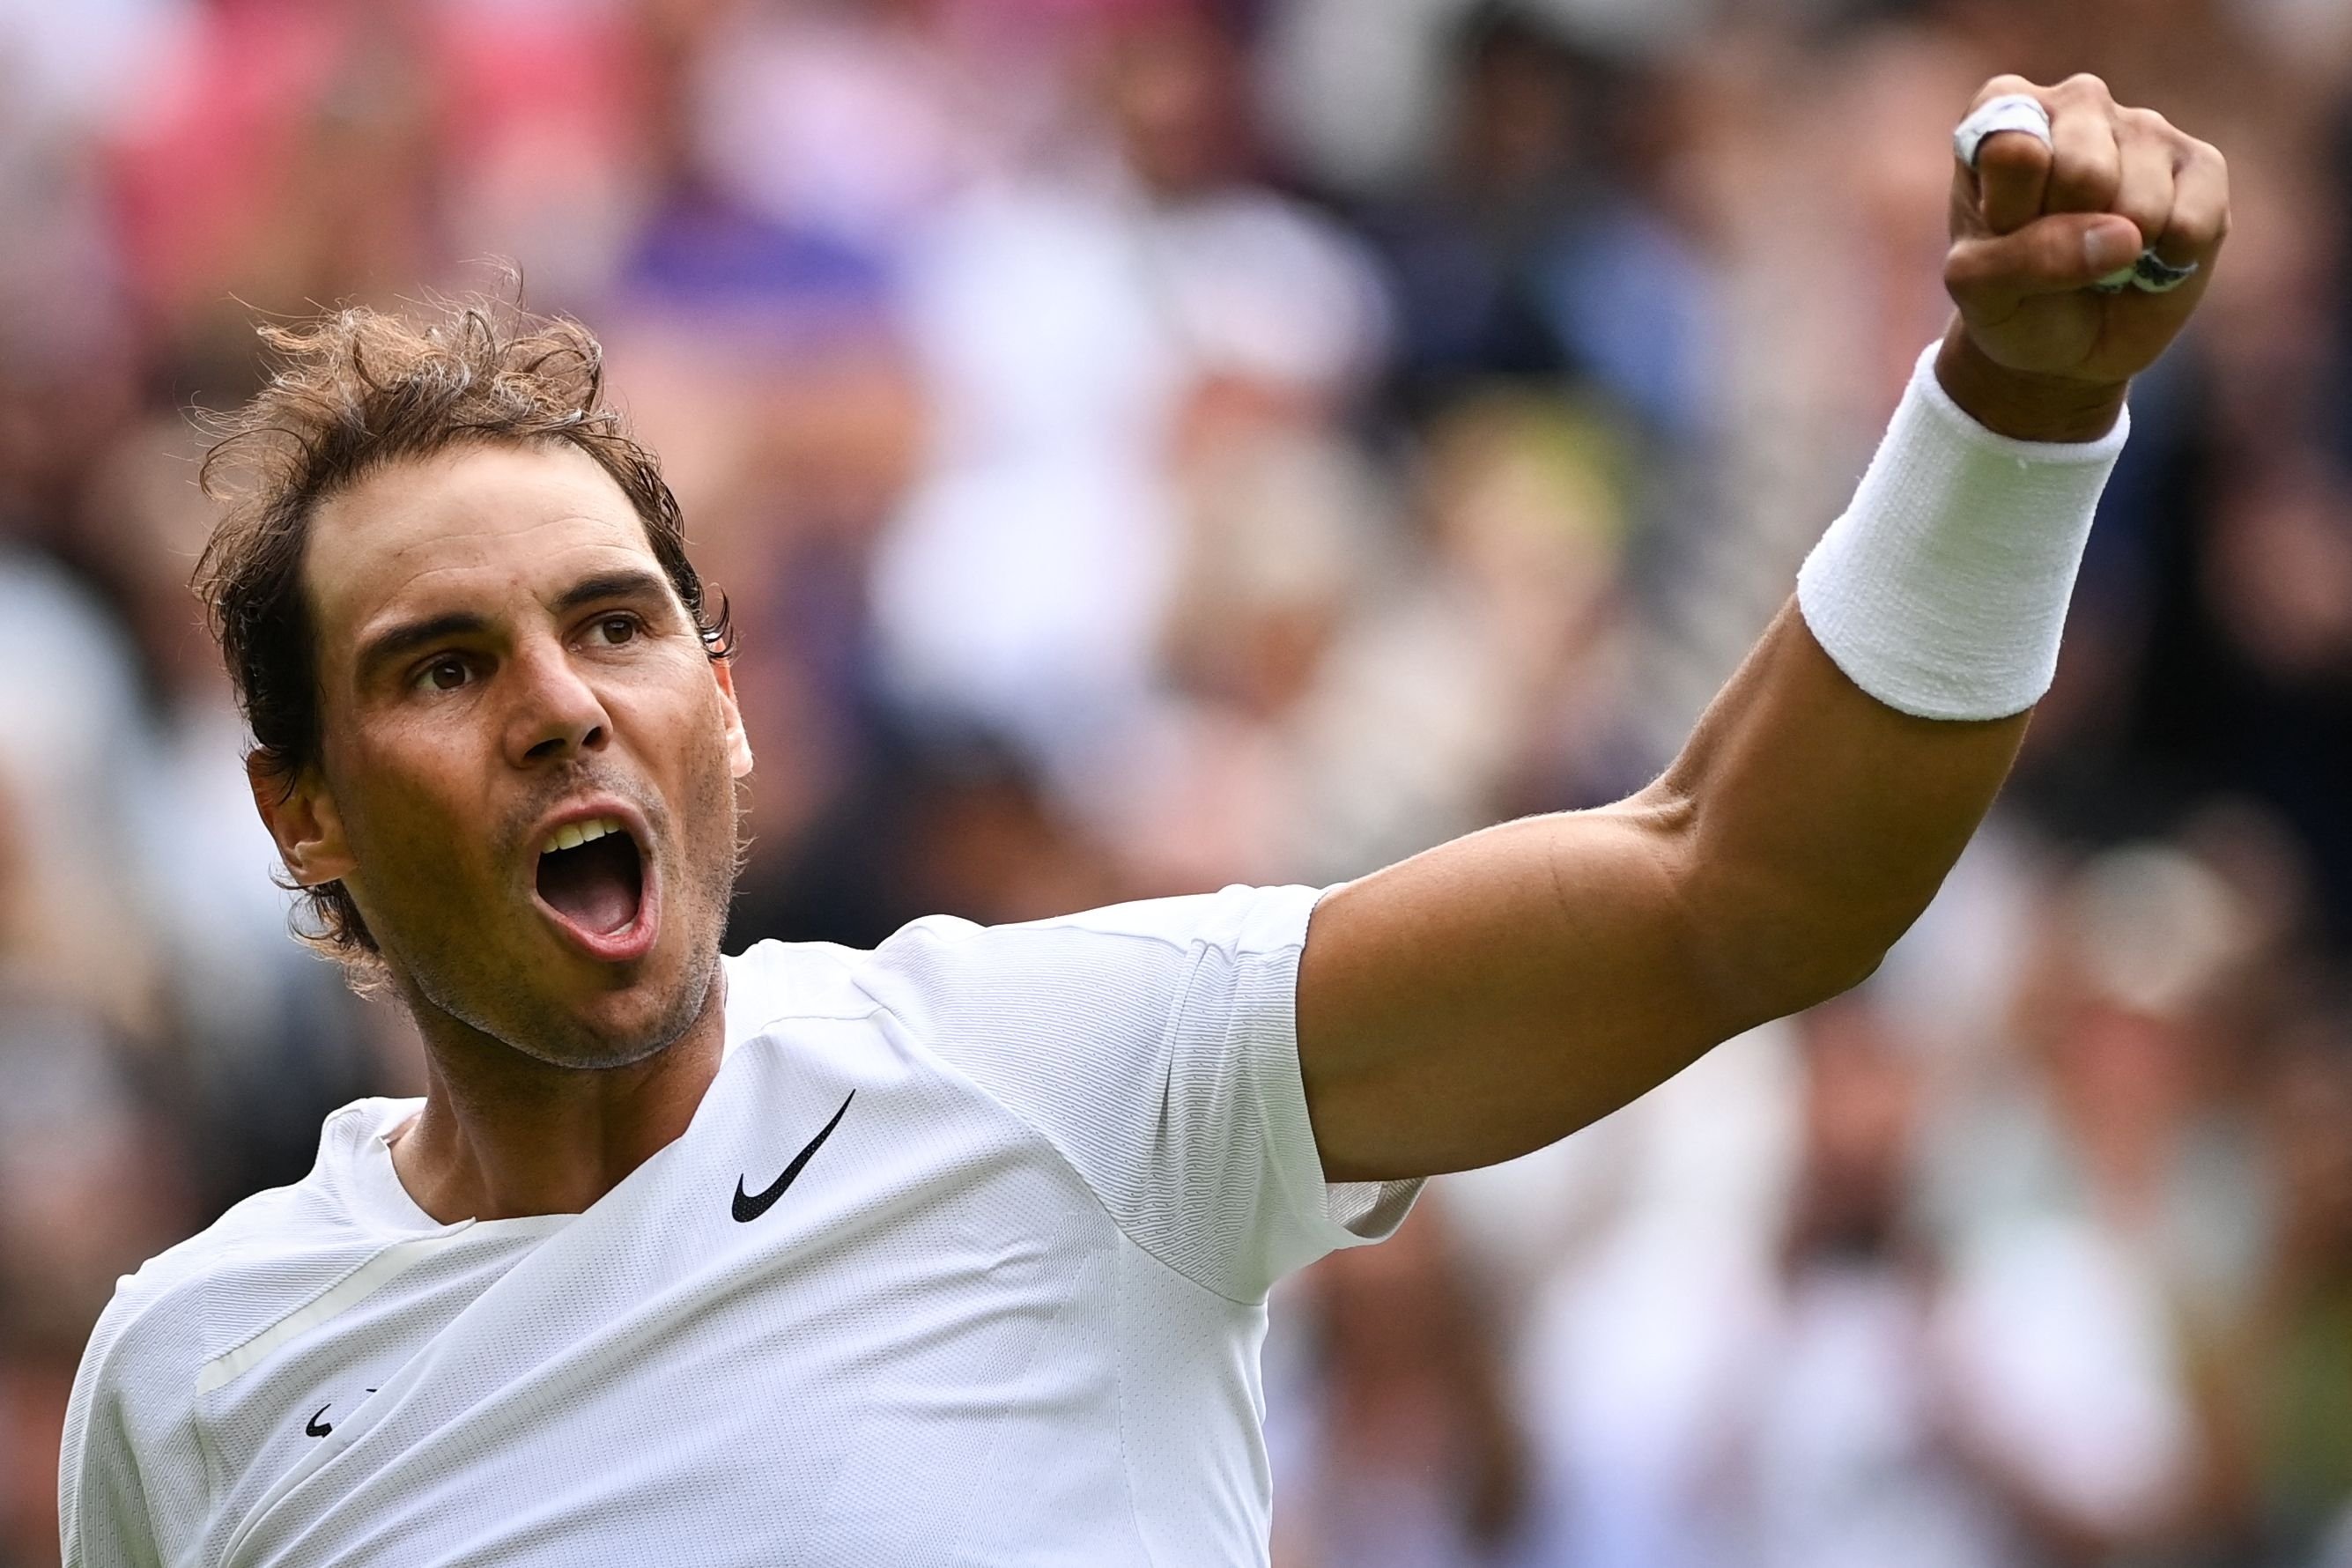 Spain's Rafael Nadal celebrates his win over Argentina's Francisco Cerundolo at the end of their Wimbledon Championships men's singles match, London, England, June 28, 2022. (AFP Photo)